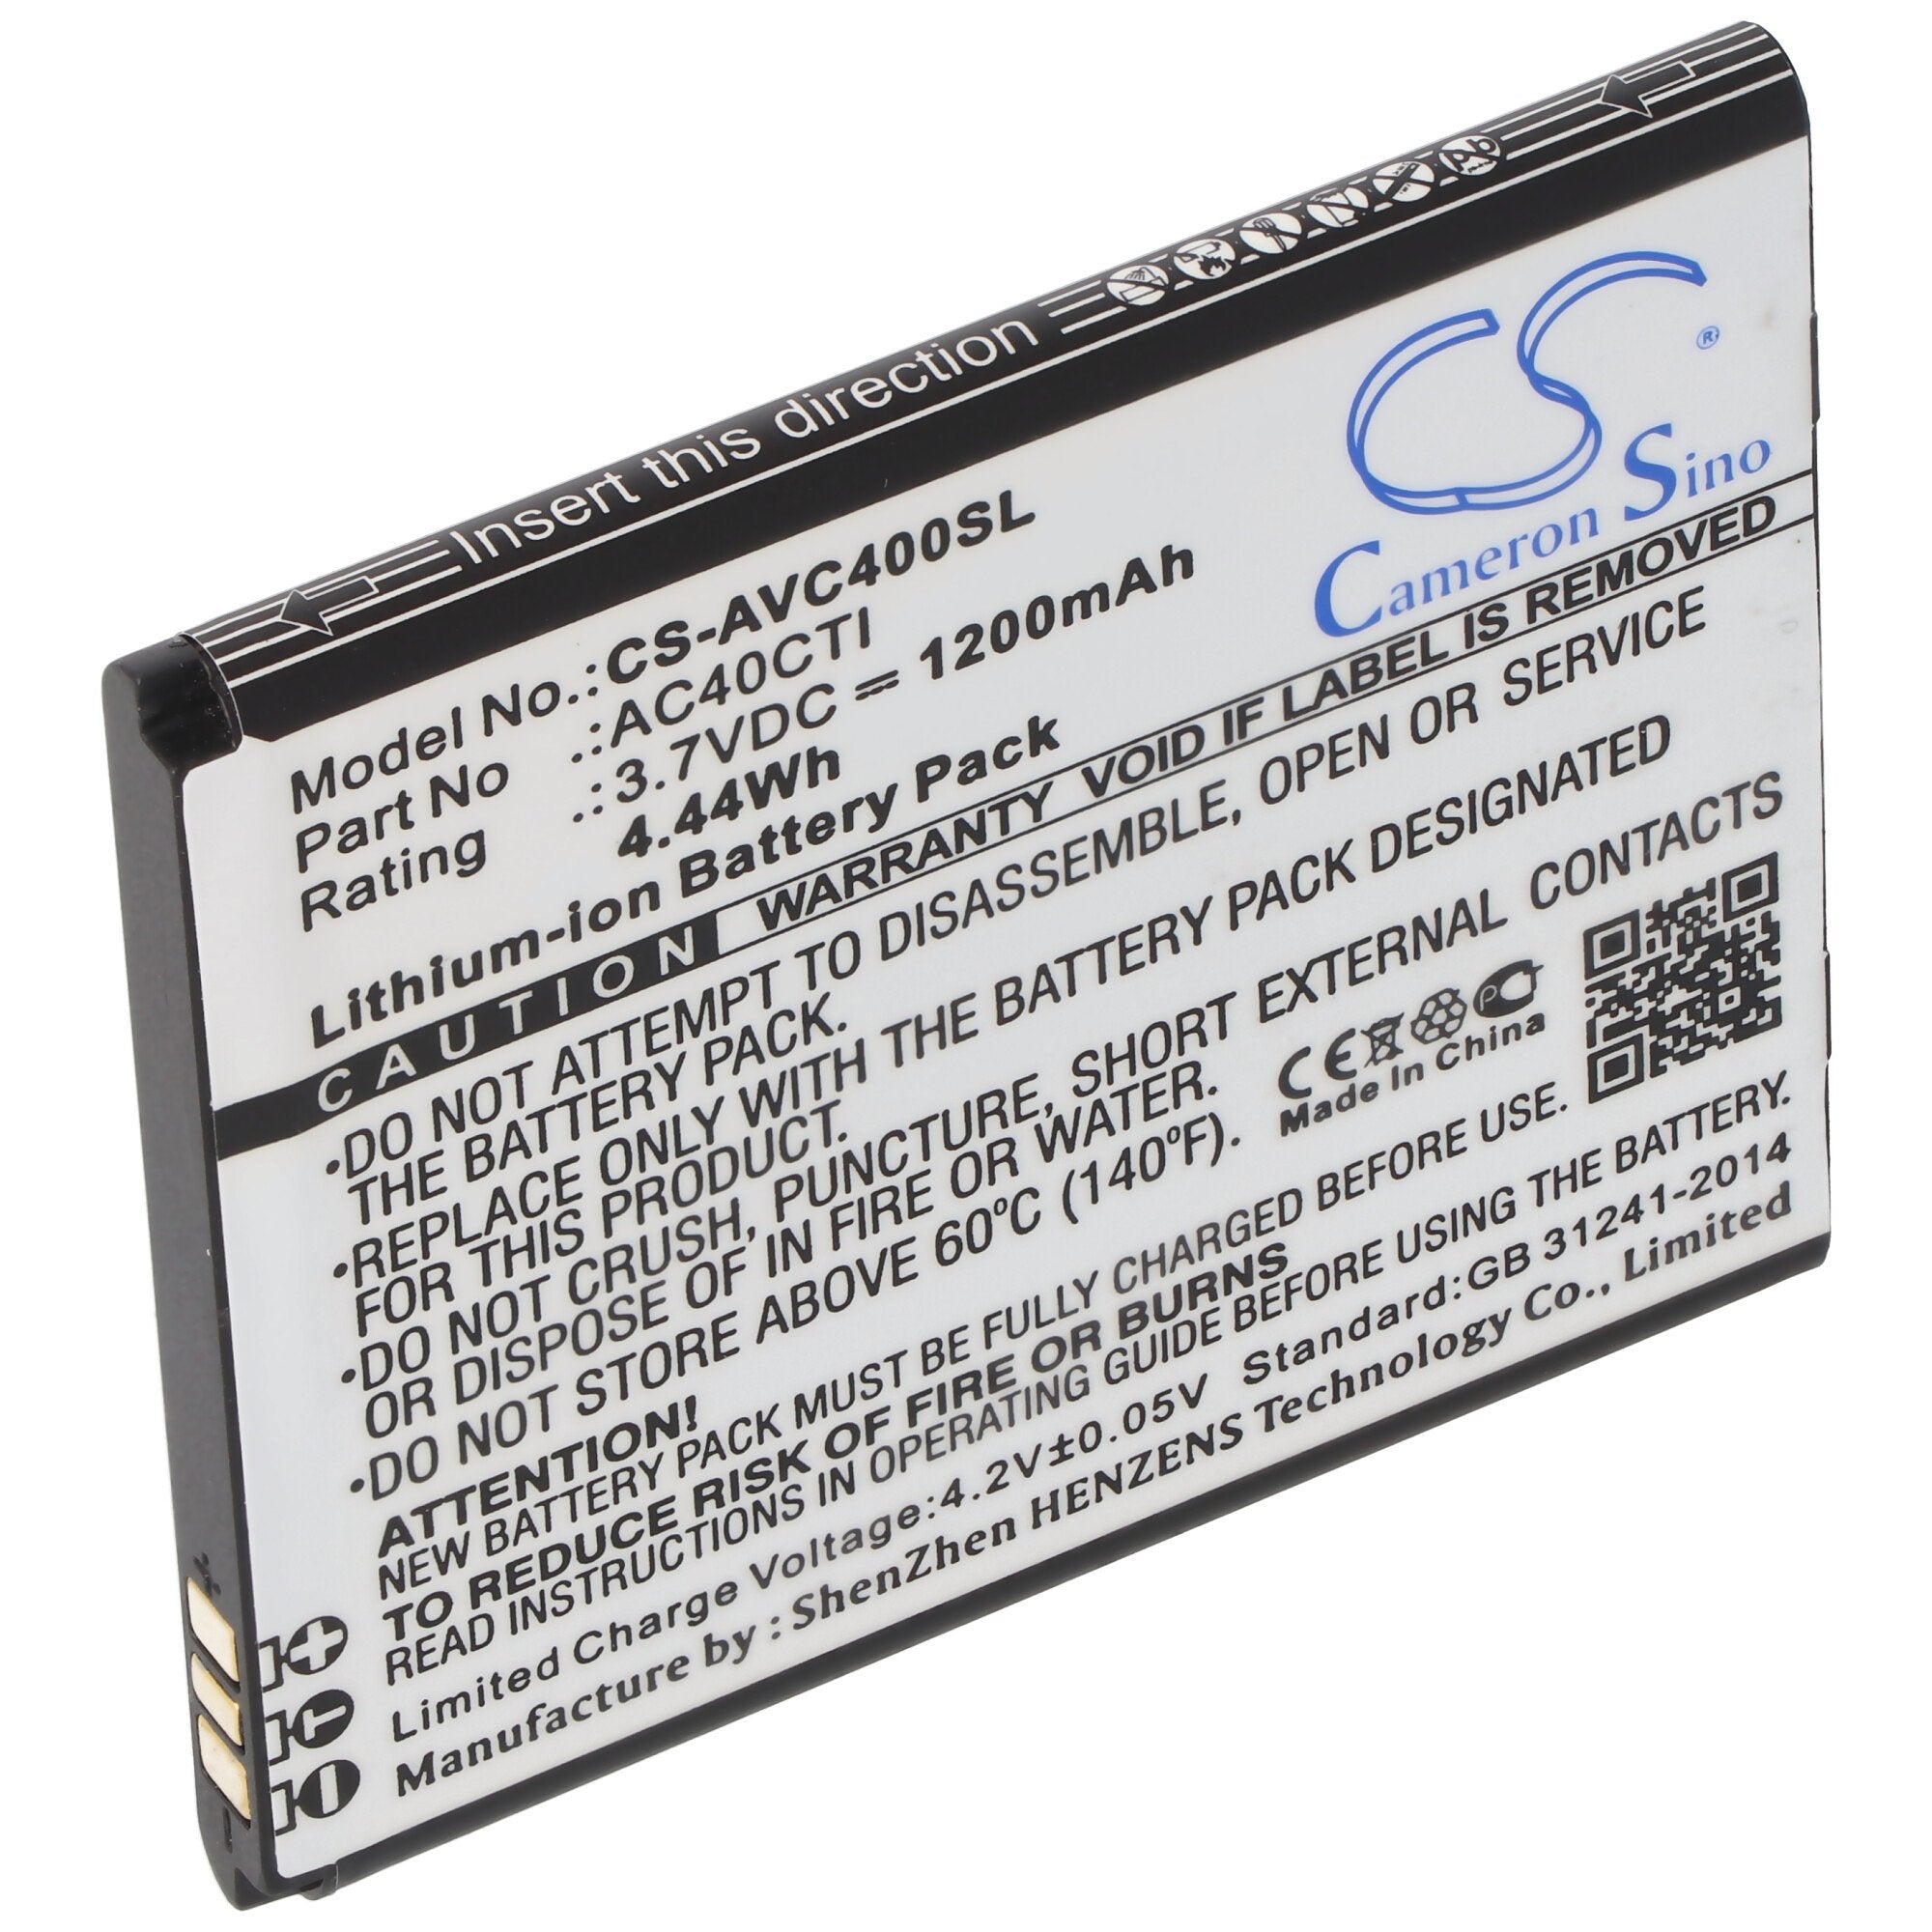 AC40CTI replica battery only suitable for the Archos AC40CTI battery